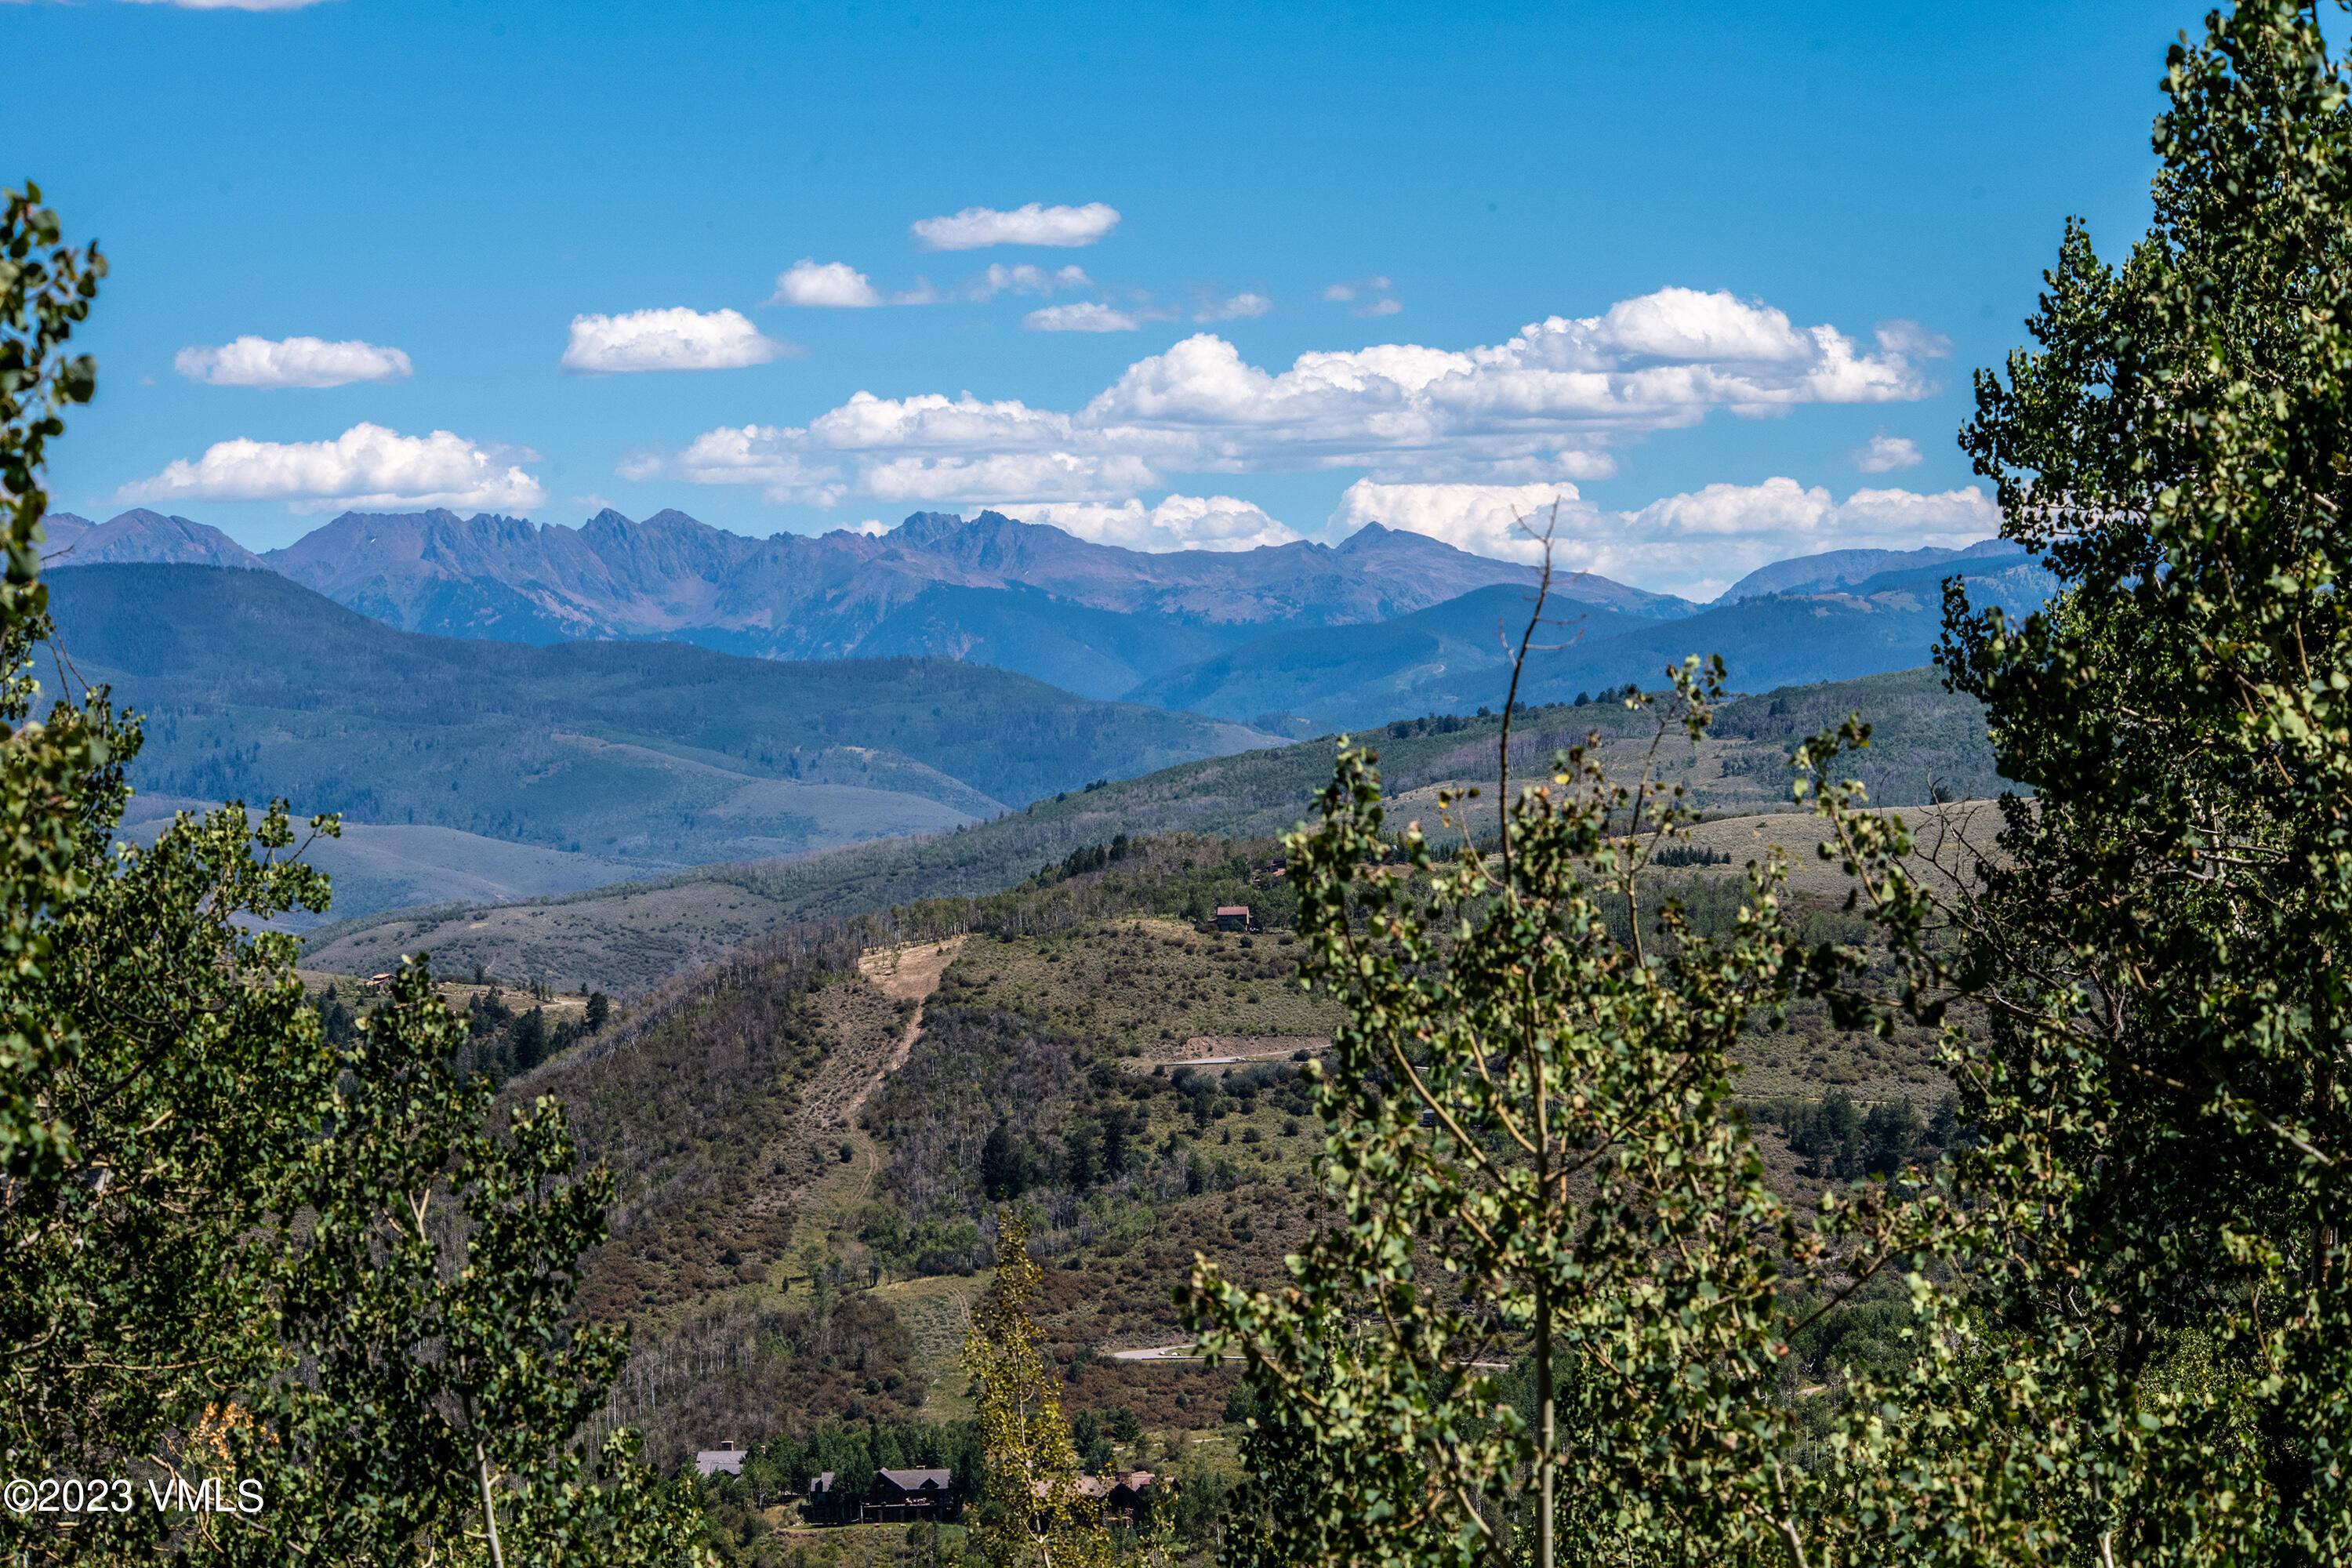 Views galore. Come see why so many people call Forest Trail their favorite area in Cordillera.